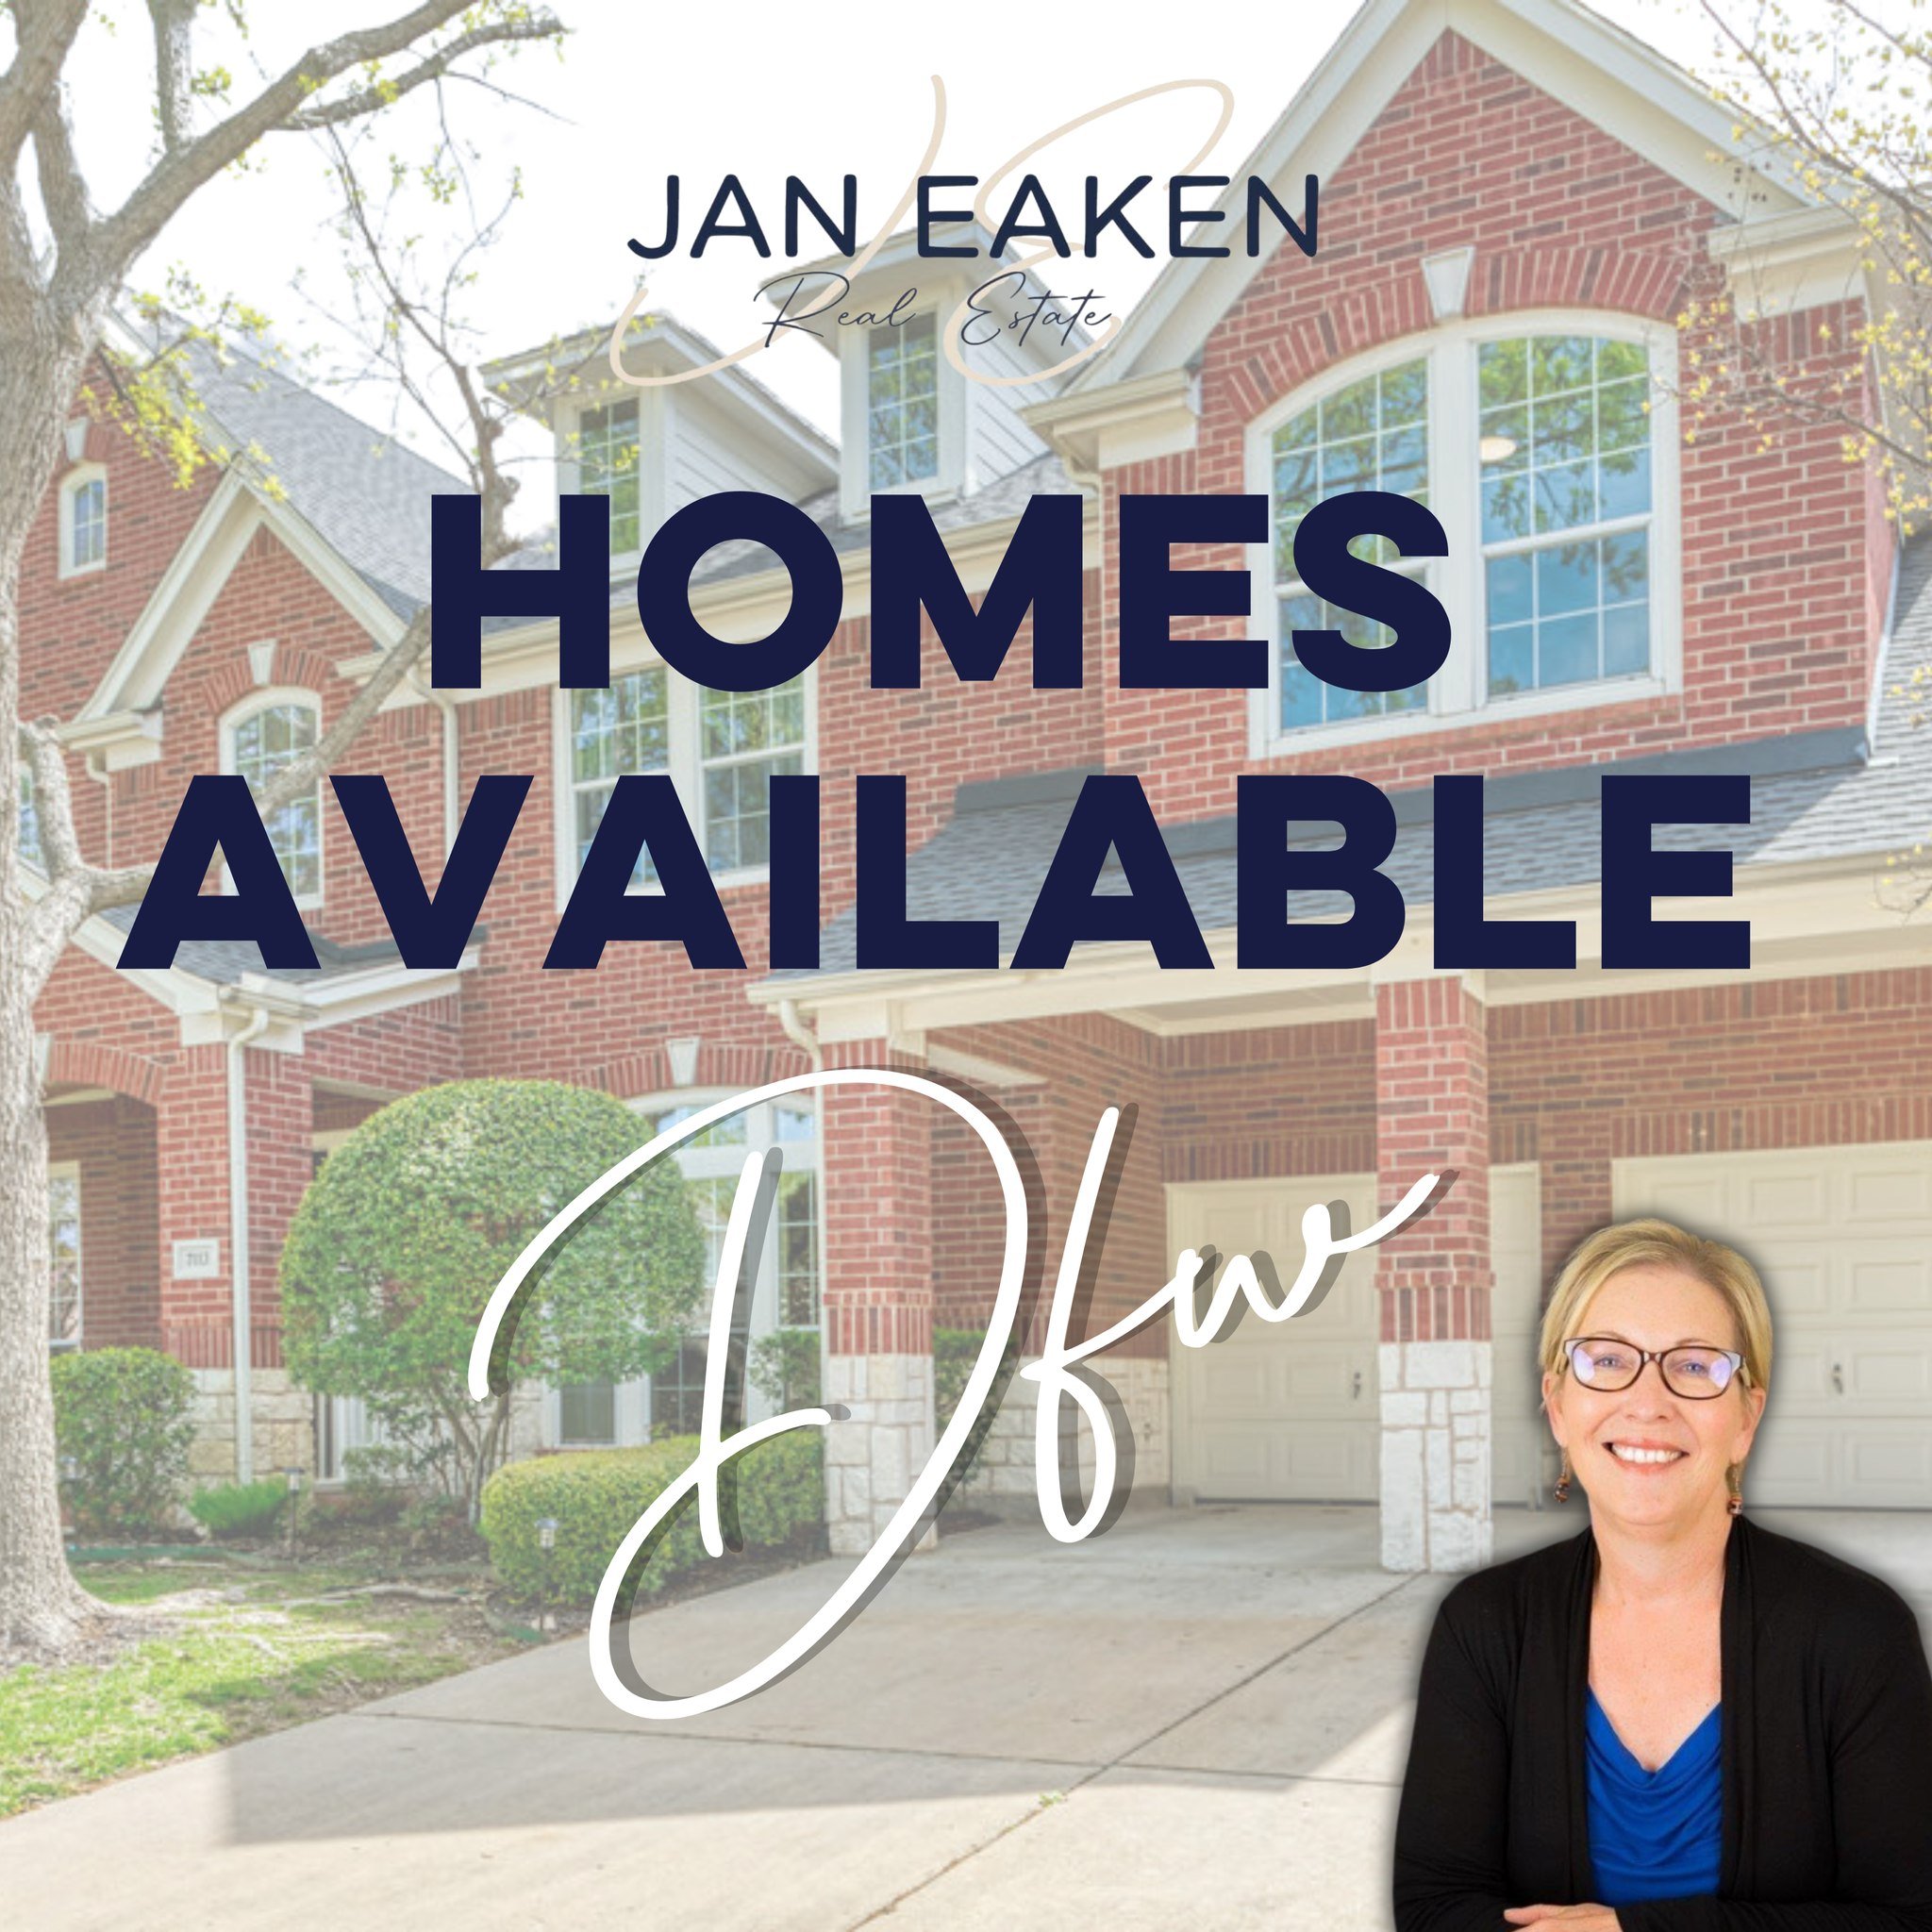 Looking for your dream home in the Dallas-Fort Worth area? Your search ends here! Check out these amazing listings! Janeaken.com

#dfwrealestate  #dreamhome  #AvailableListings  #dallas  #fortworth  #househunting